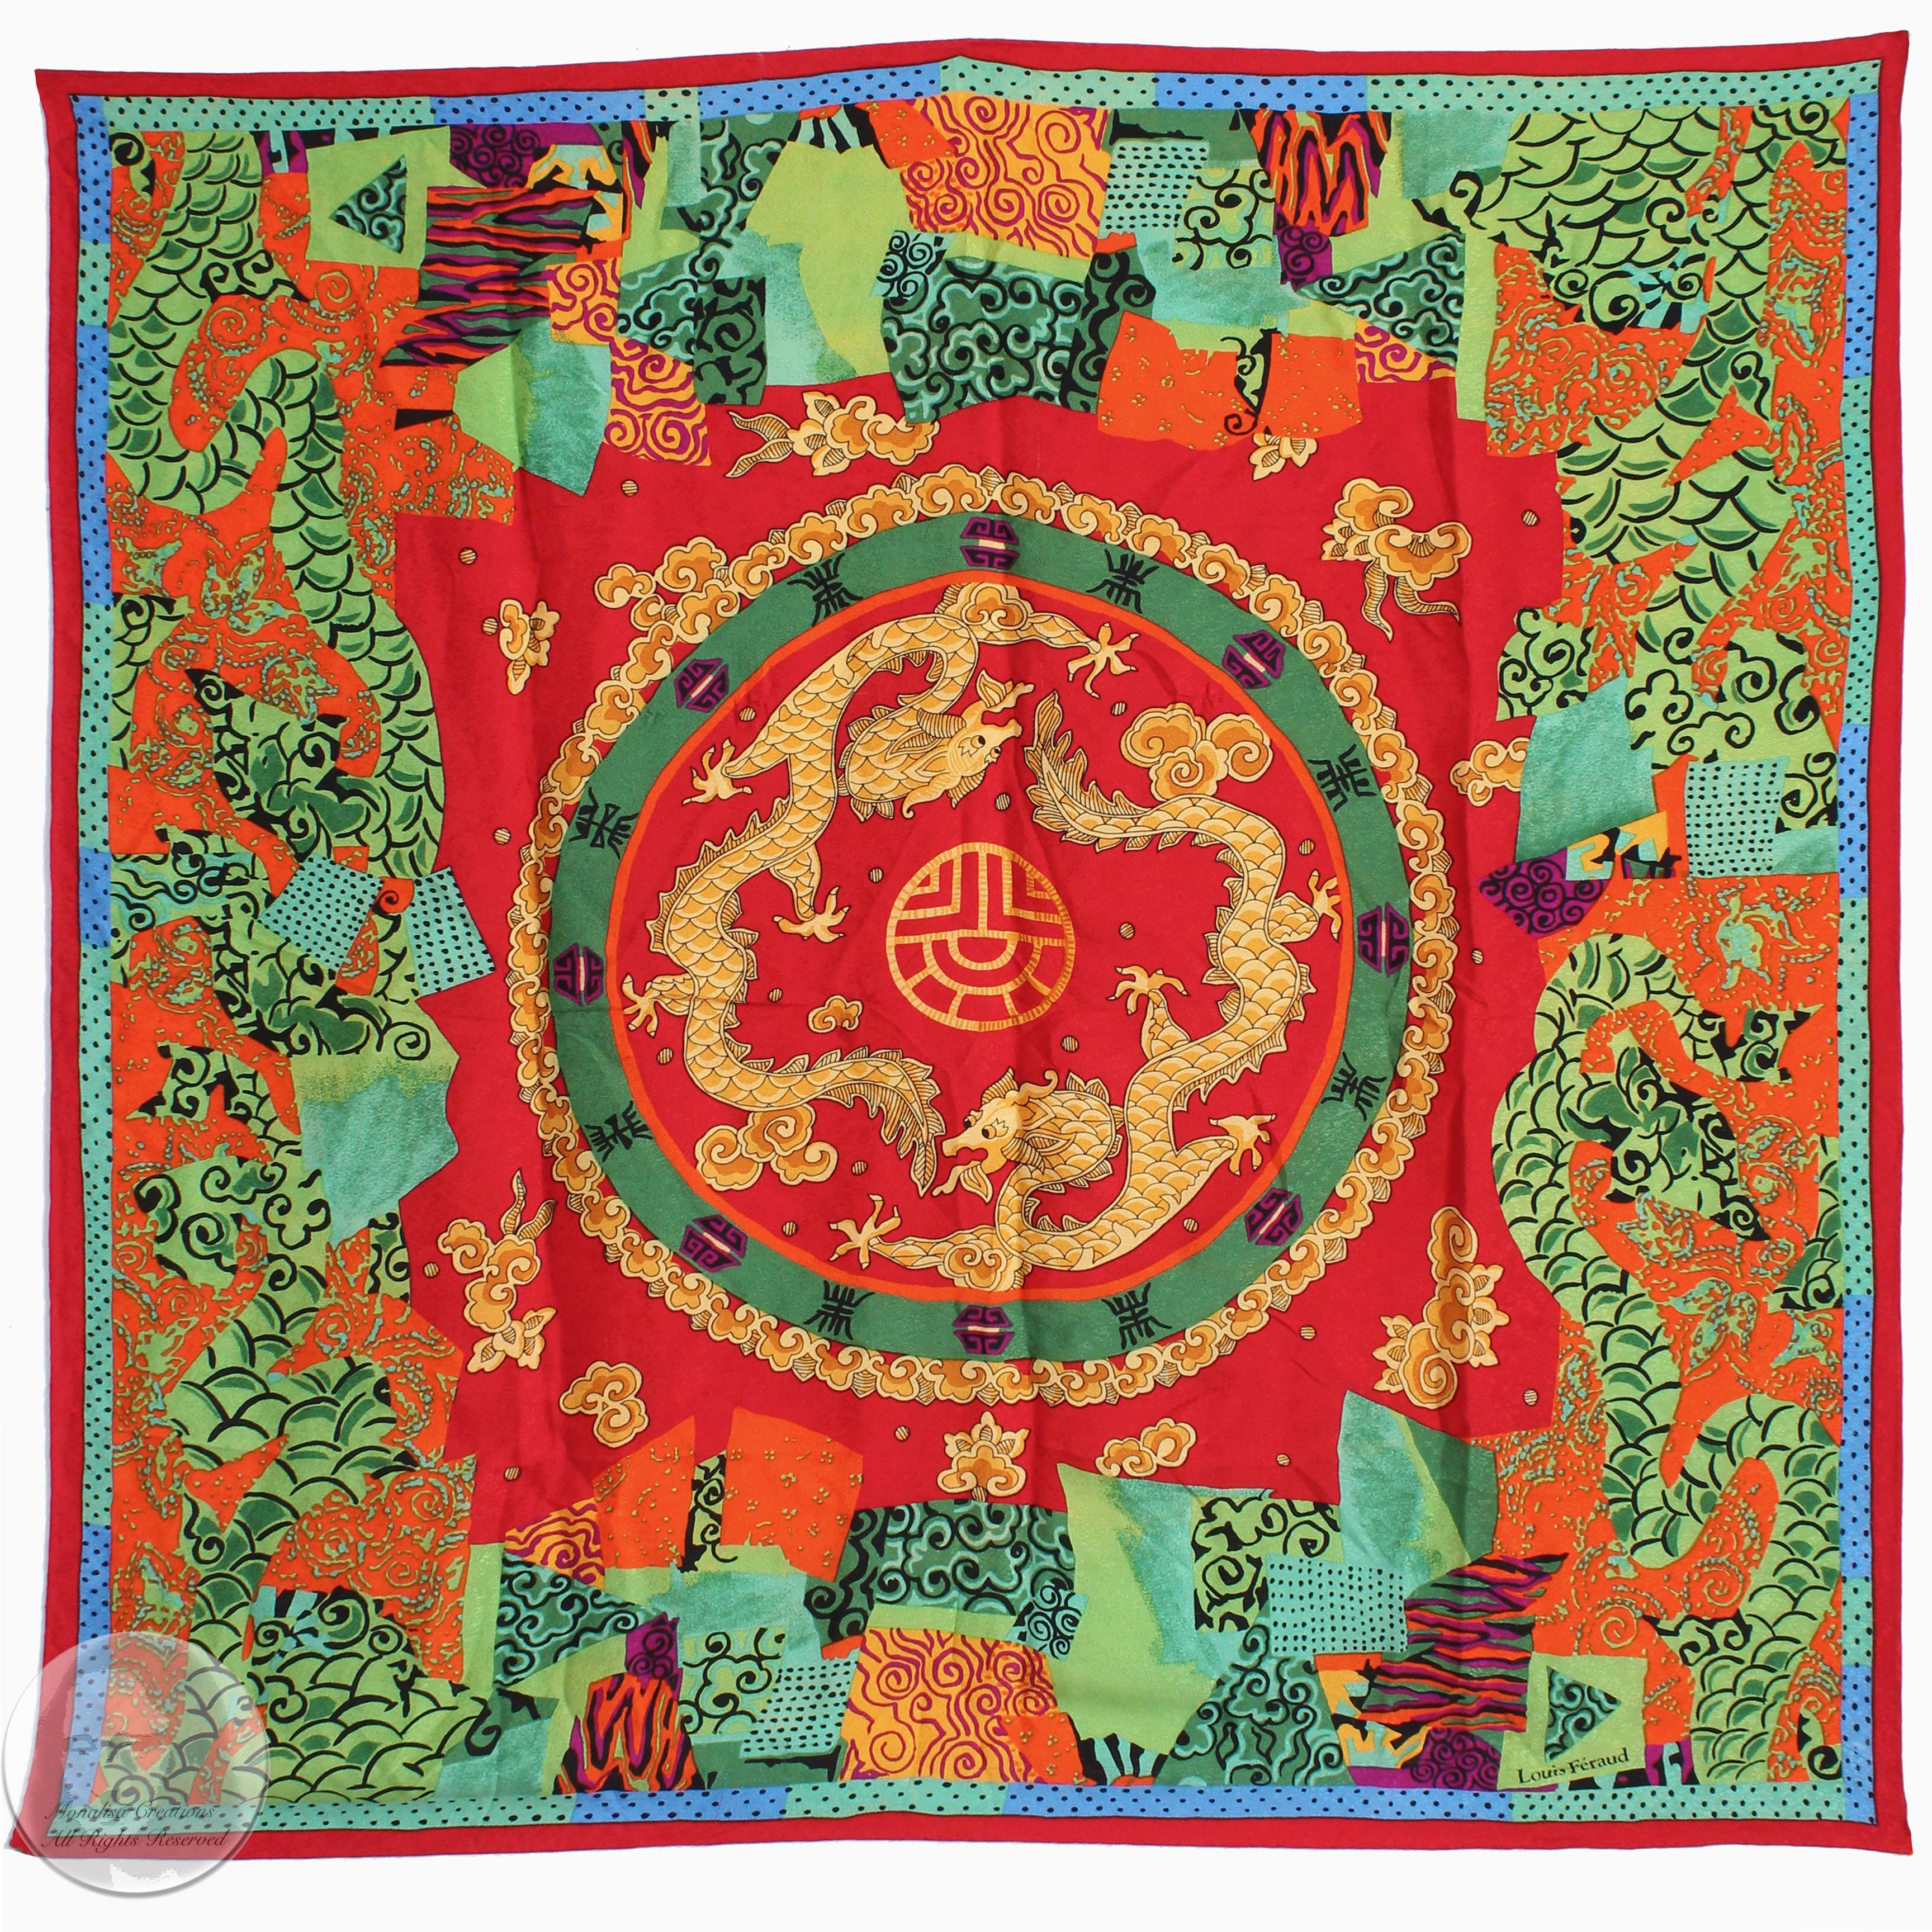 This lovely silk jacquard scarf or shawl was made by Louis Feraud, most likely in the late 1980s. Made from a gorgeous red silk, it features dancing golden dragons and other Asian motifs and symbols. 

A gorgeous scarf or shawl that can be styled in